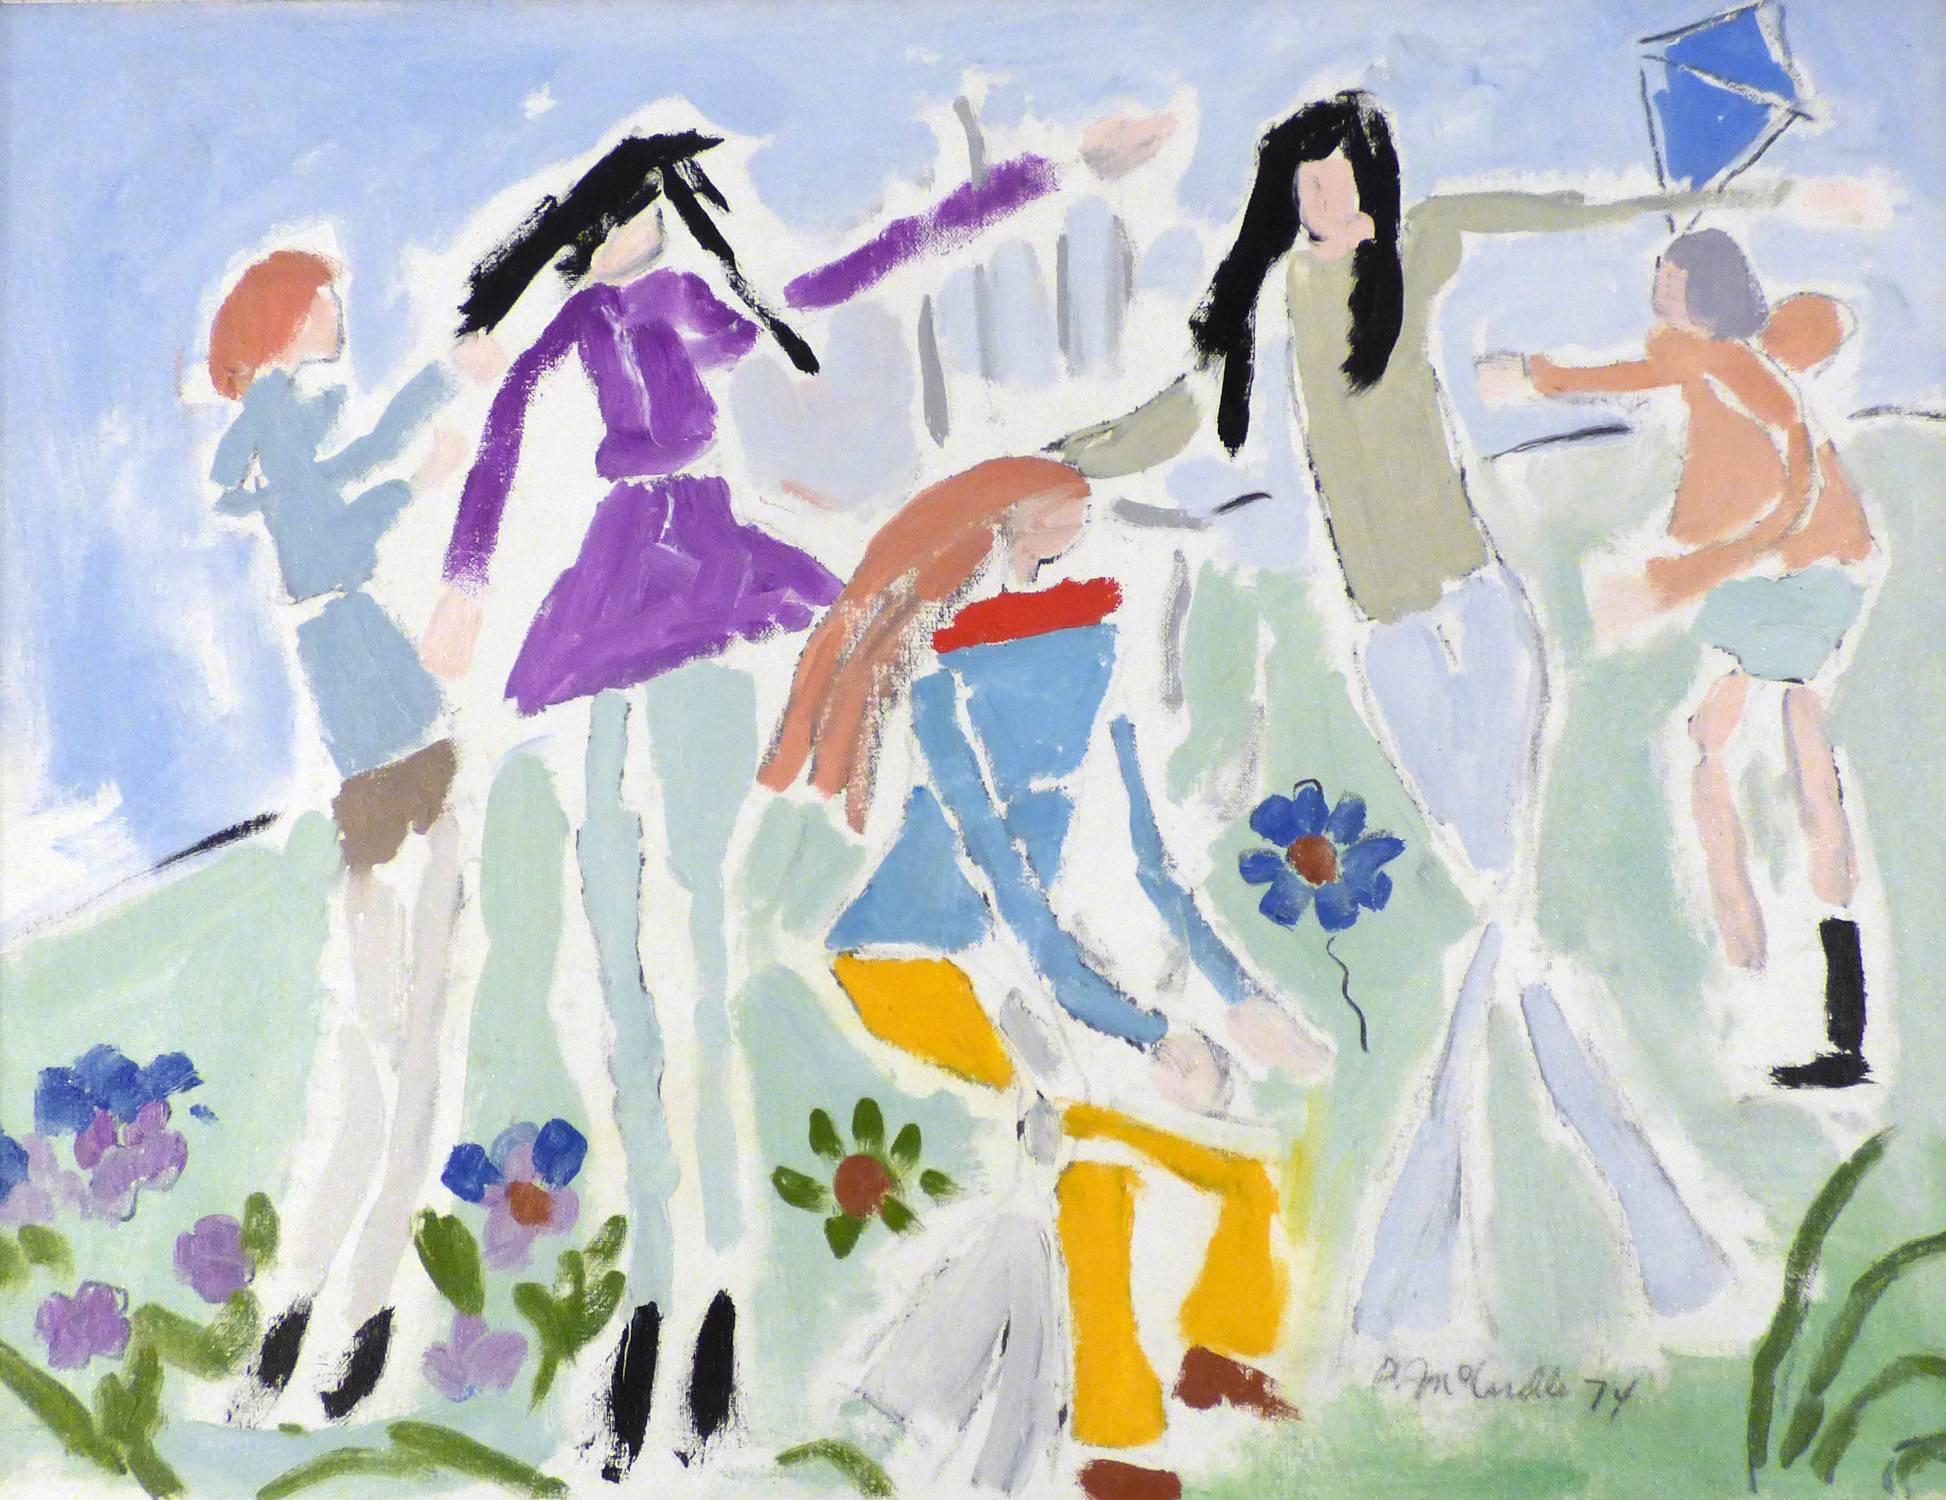 Patrick McArdle Landscape Painting - Girls Just Want to Have Fun